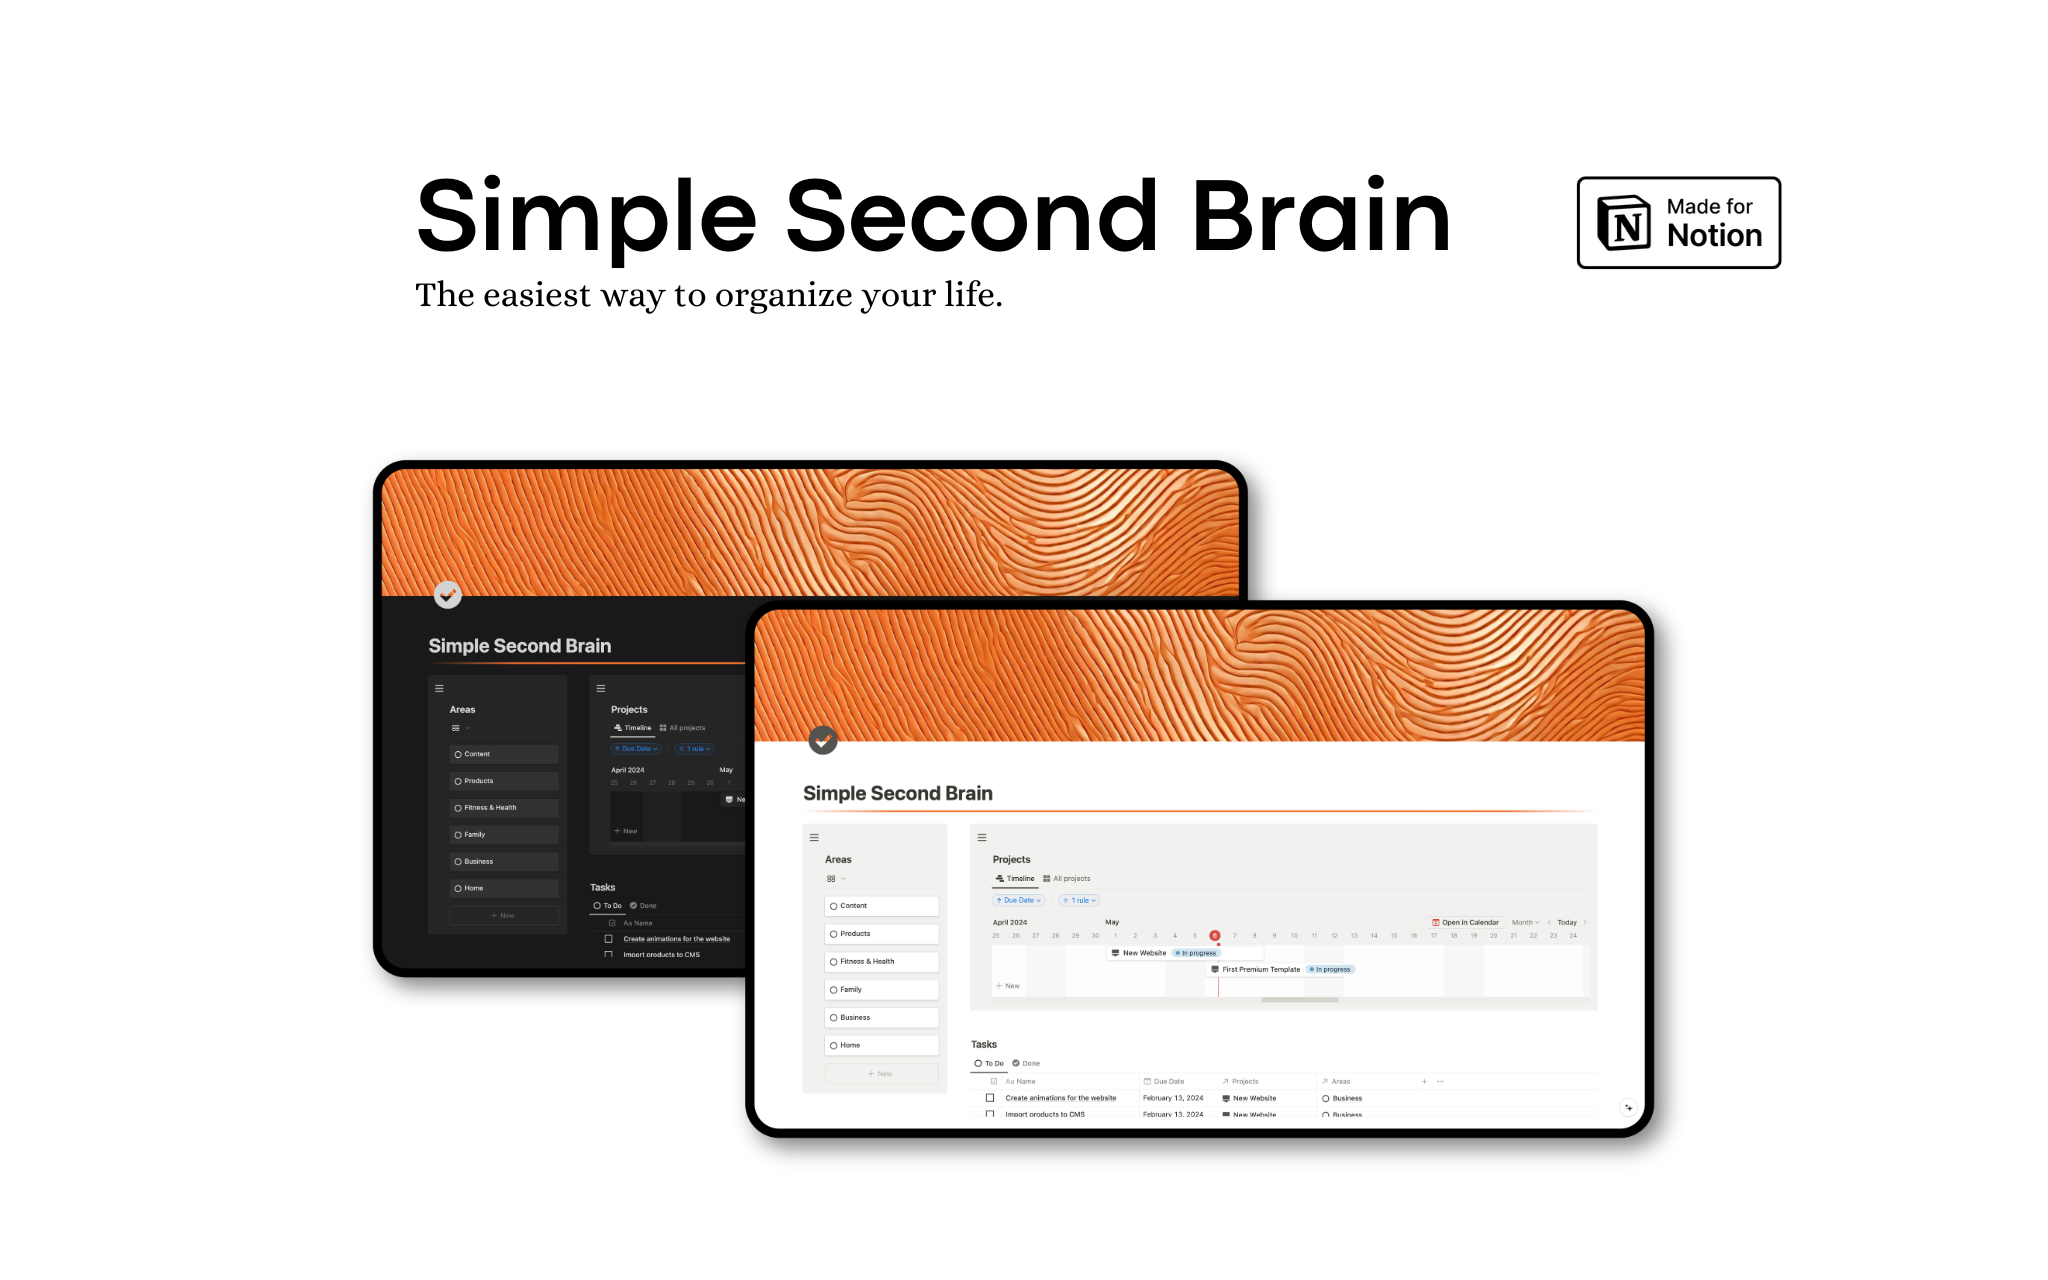 With the Simple Second Brain you have a Template that supports everything you need to become more productive, plan projects and organize resources.